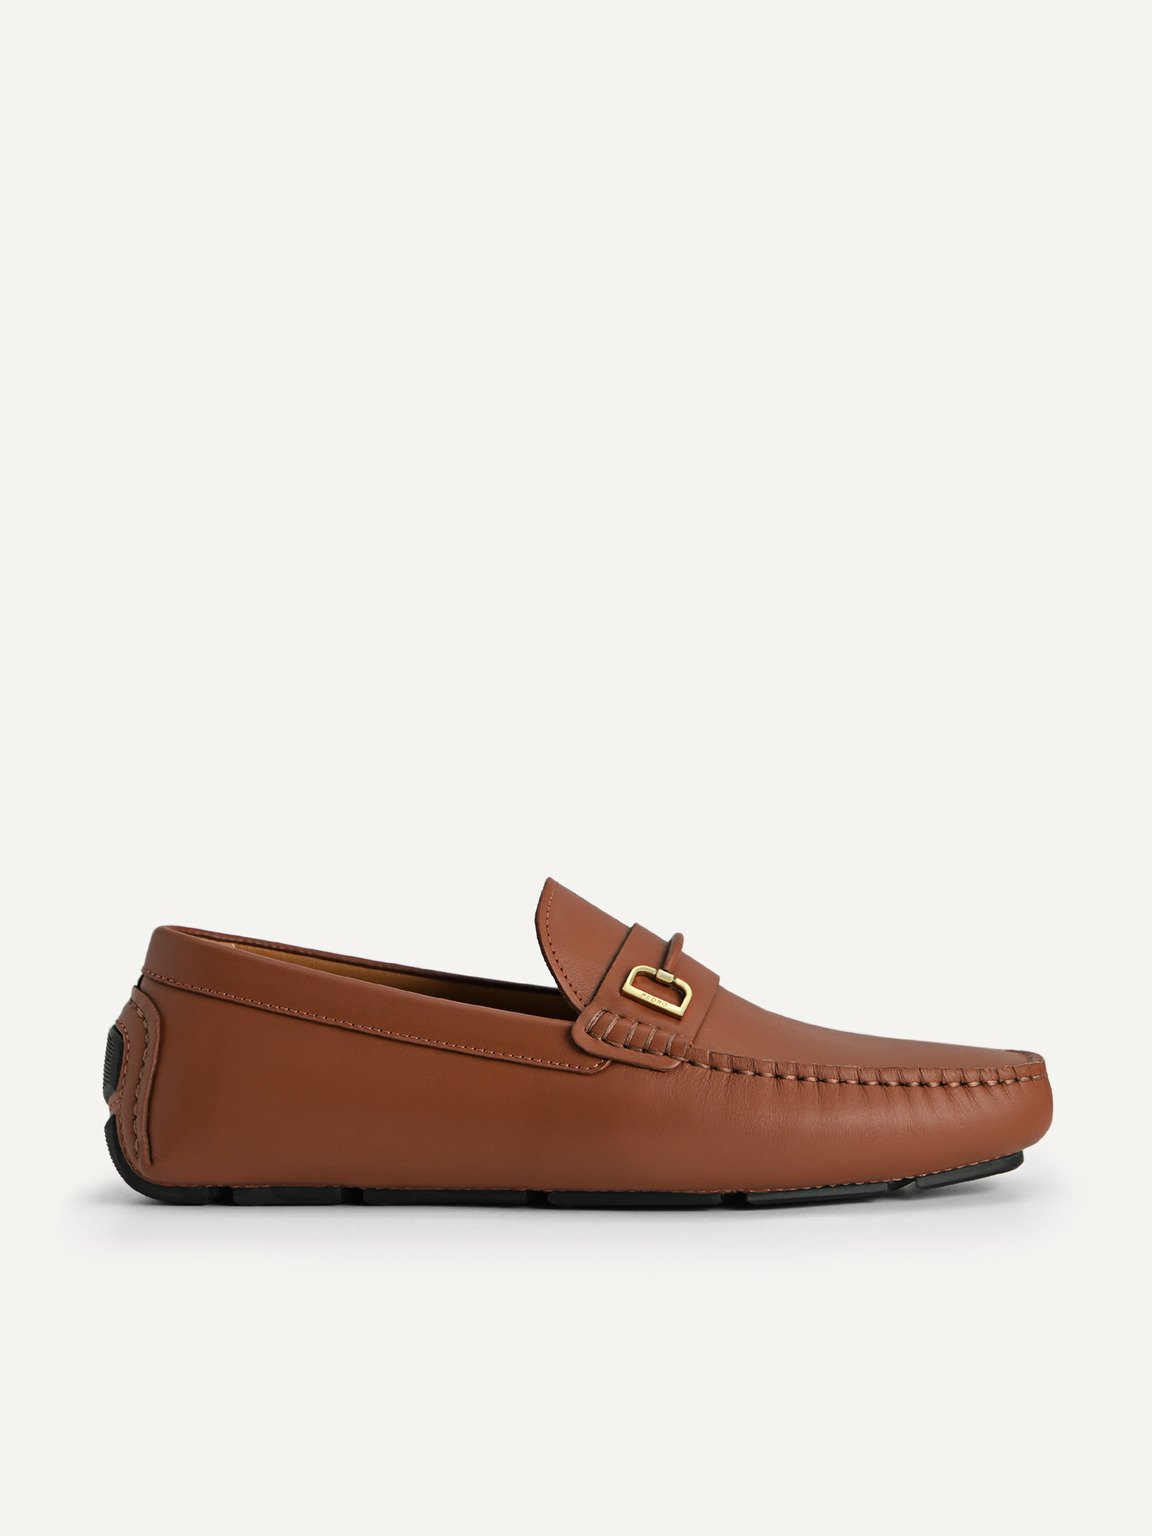 Leather Driving Shoes with Metal Bit, Cognac